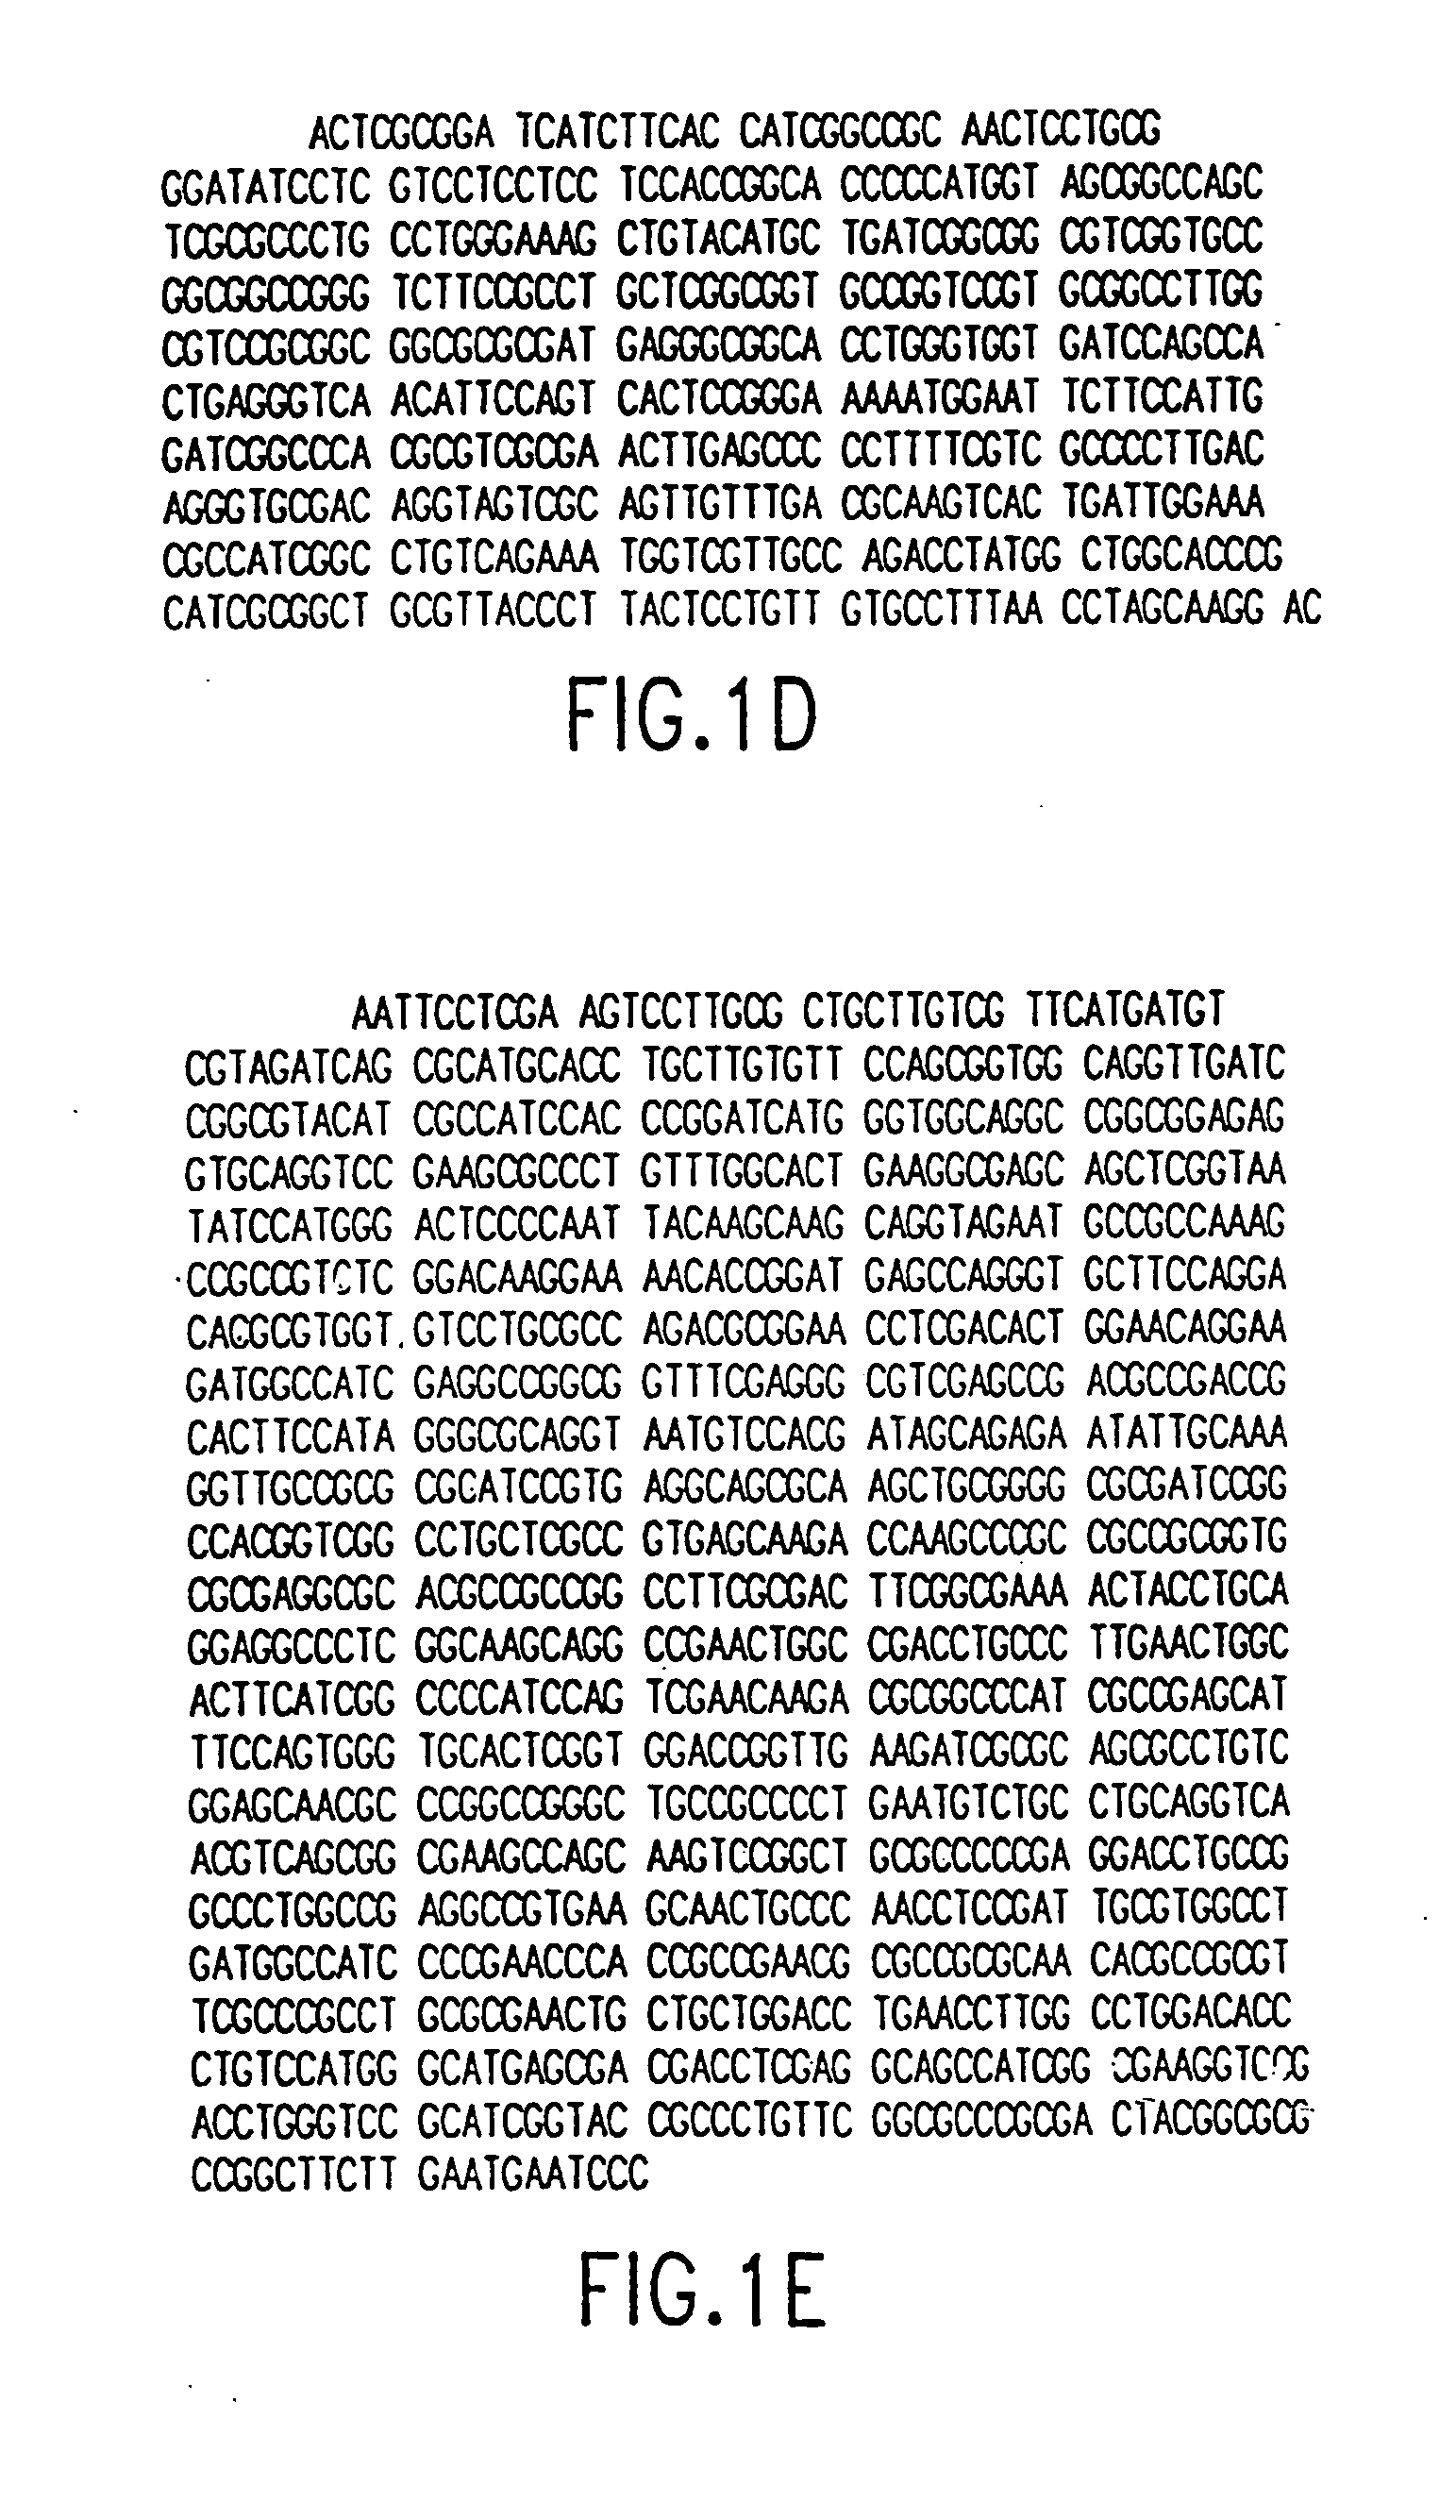 Tissue-specific and pathogen-specific toxic agents, ribozymes, dnazymes and antisense oligonucleotides, and methods of use thereof